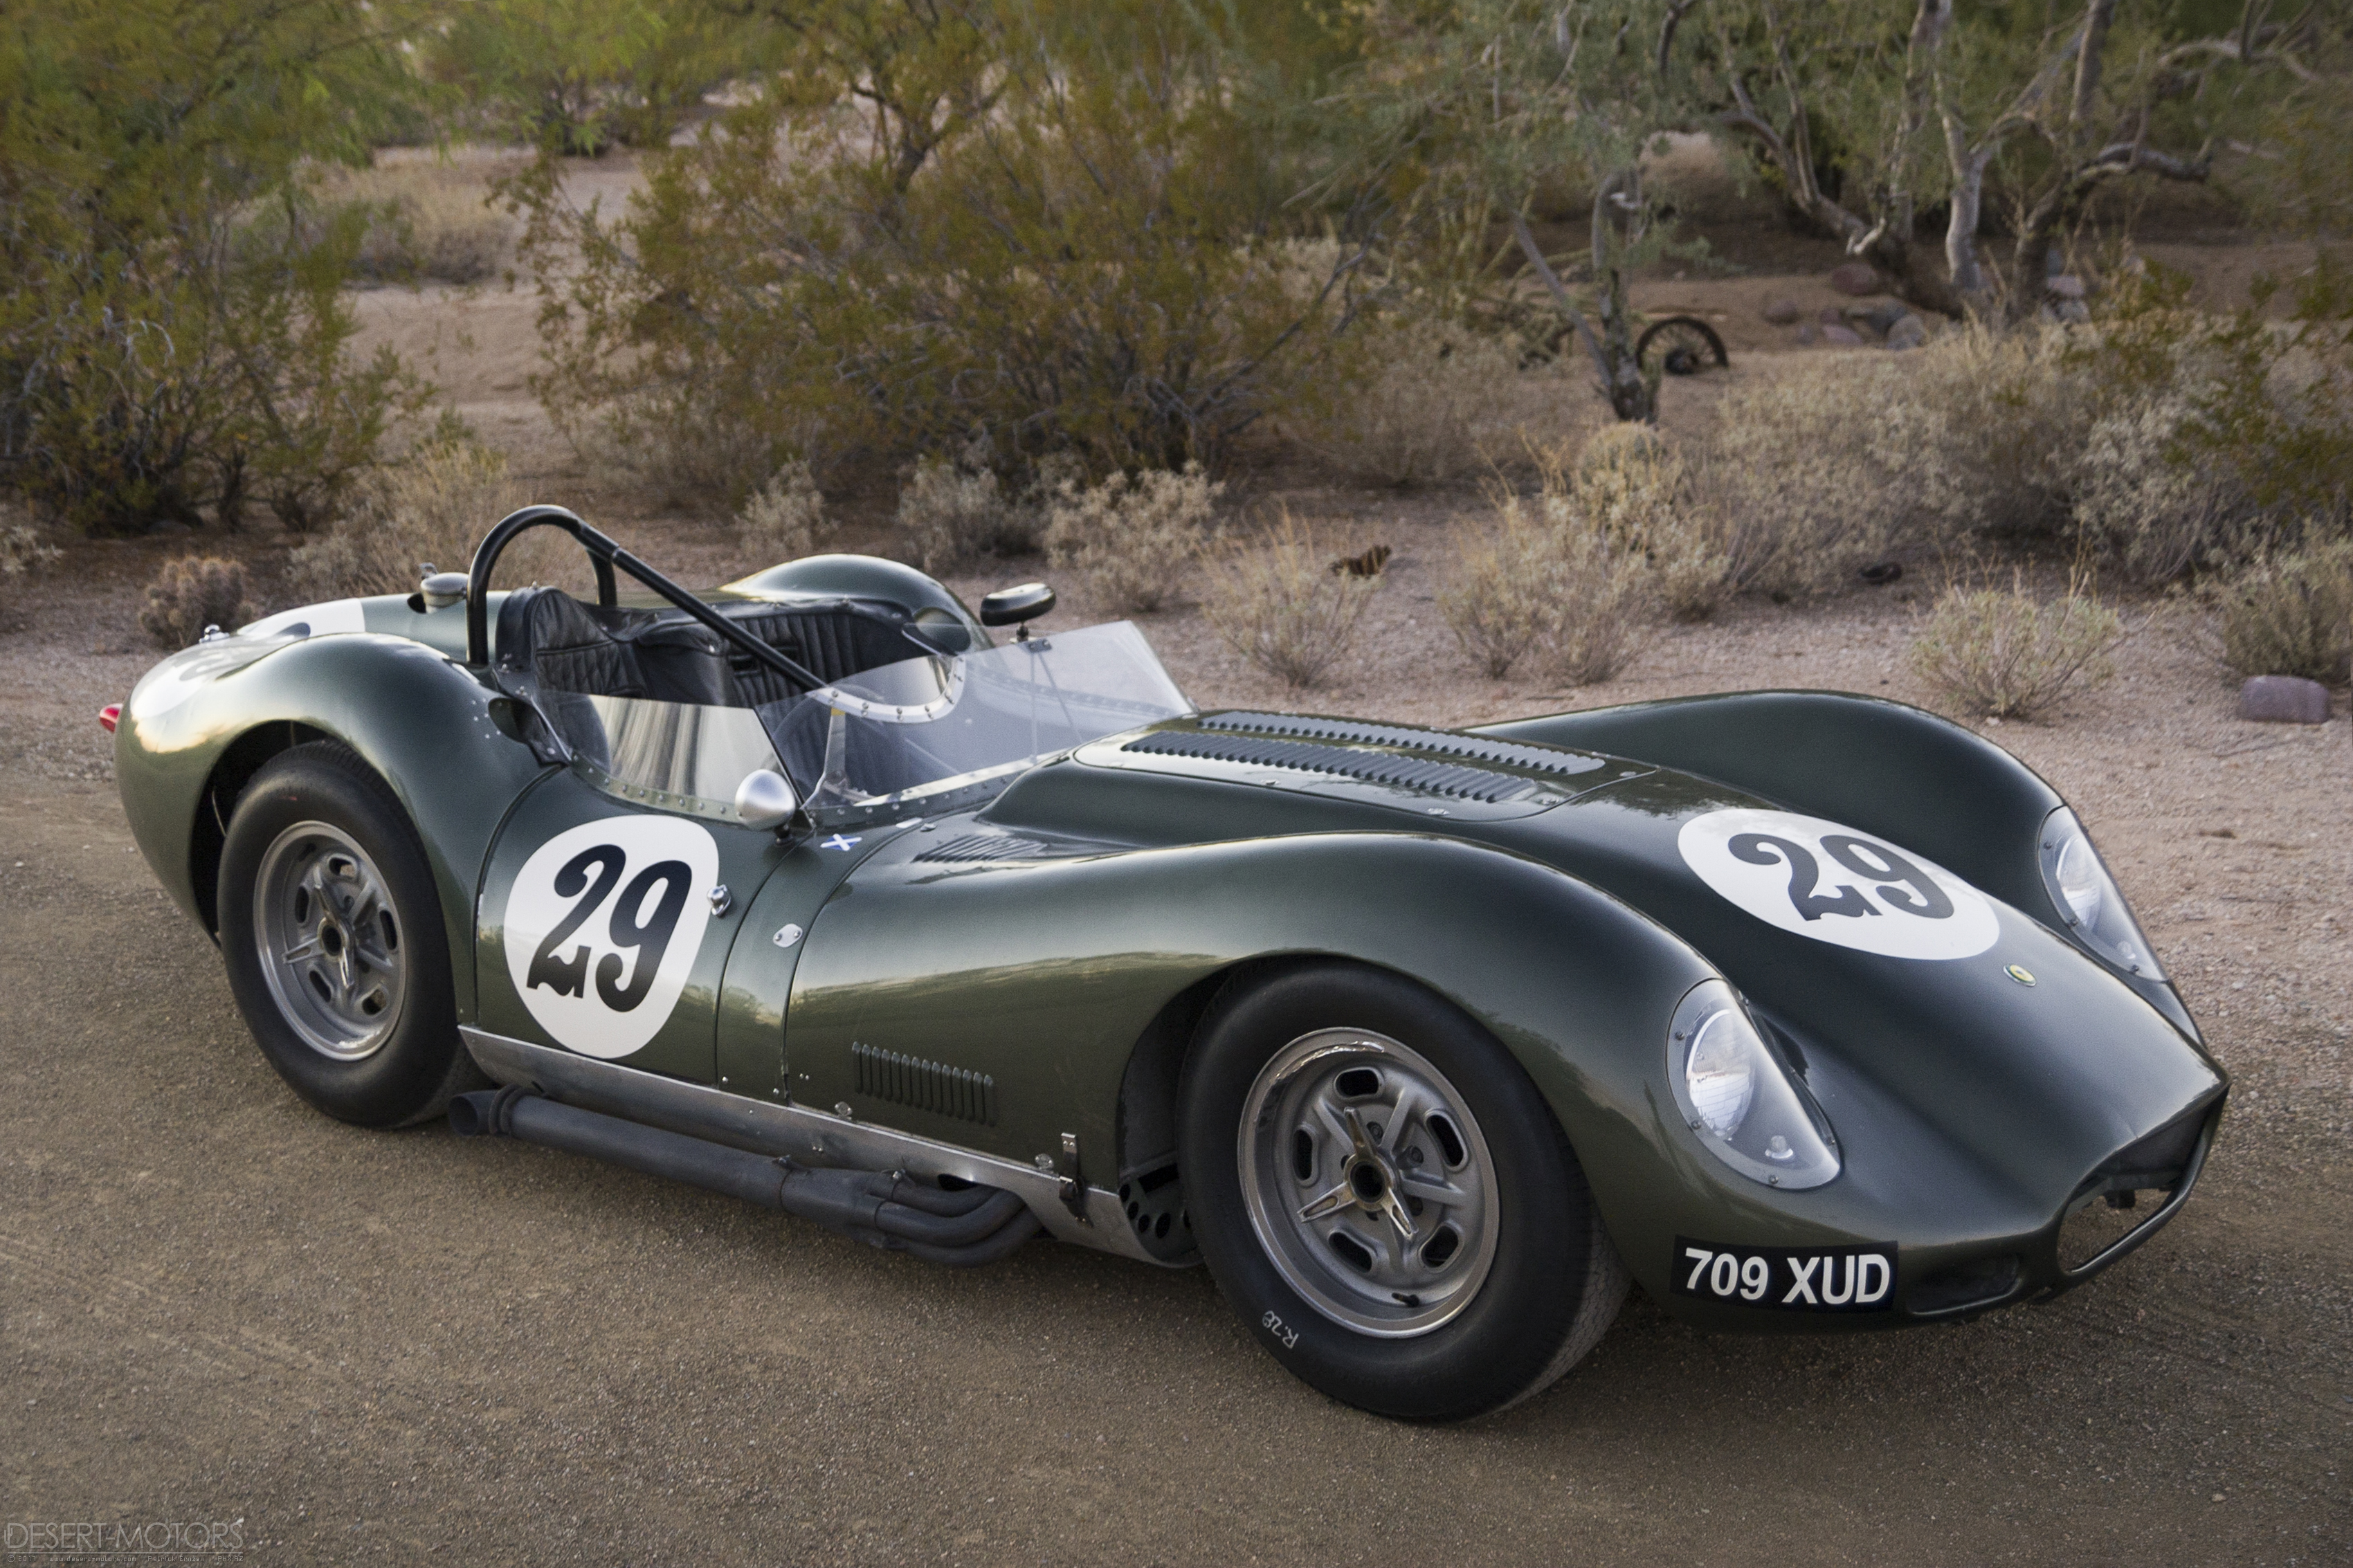 General 3400x2266 lister-chevrolet 1959 sports car classic car race cars green cars oldtimers car vehicle American cars